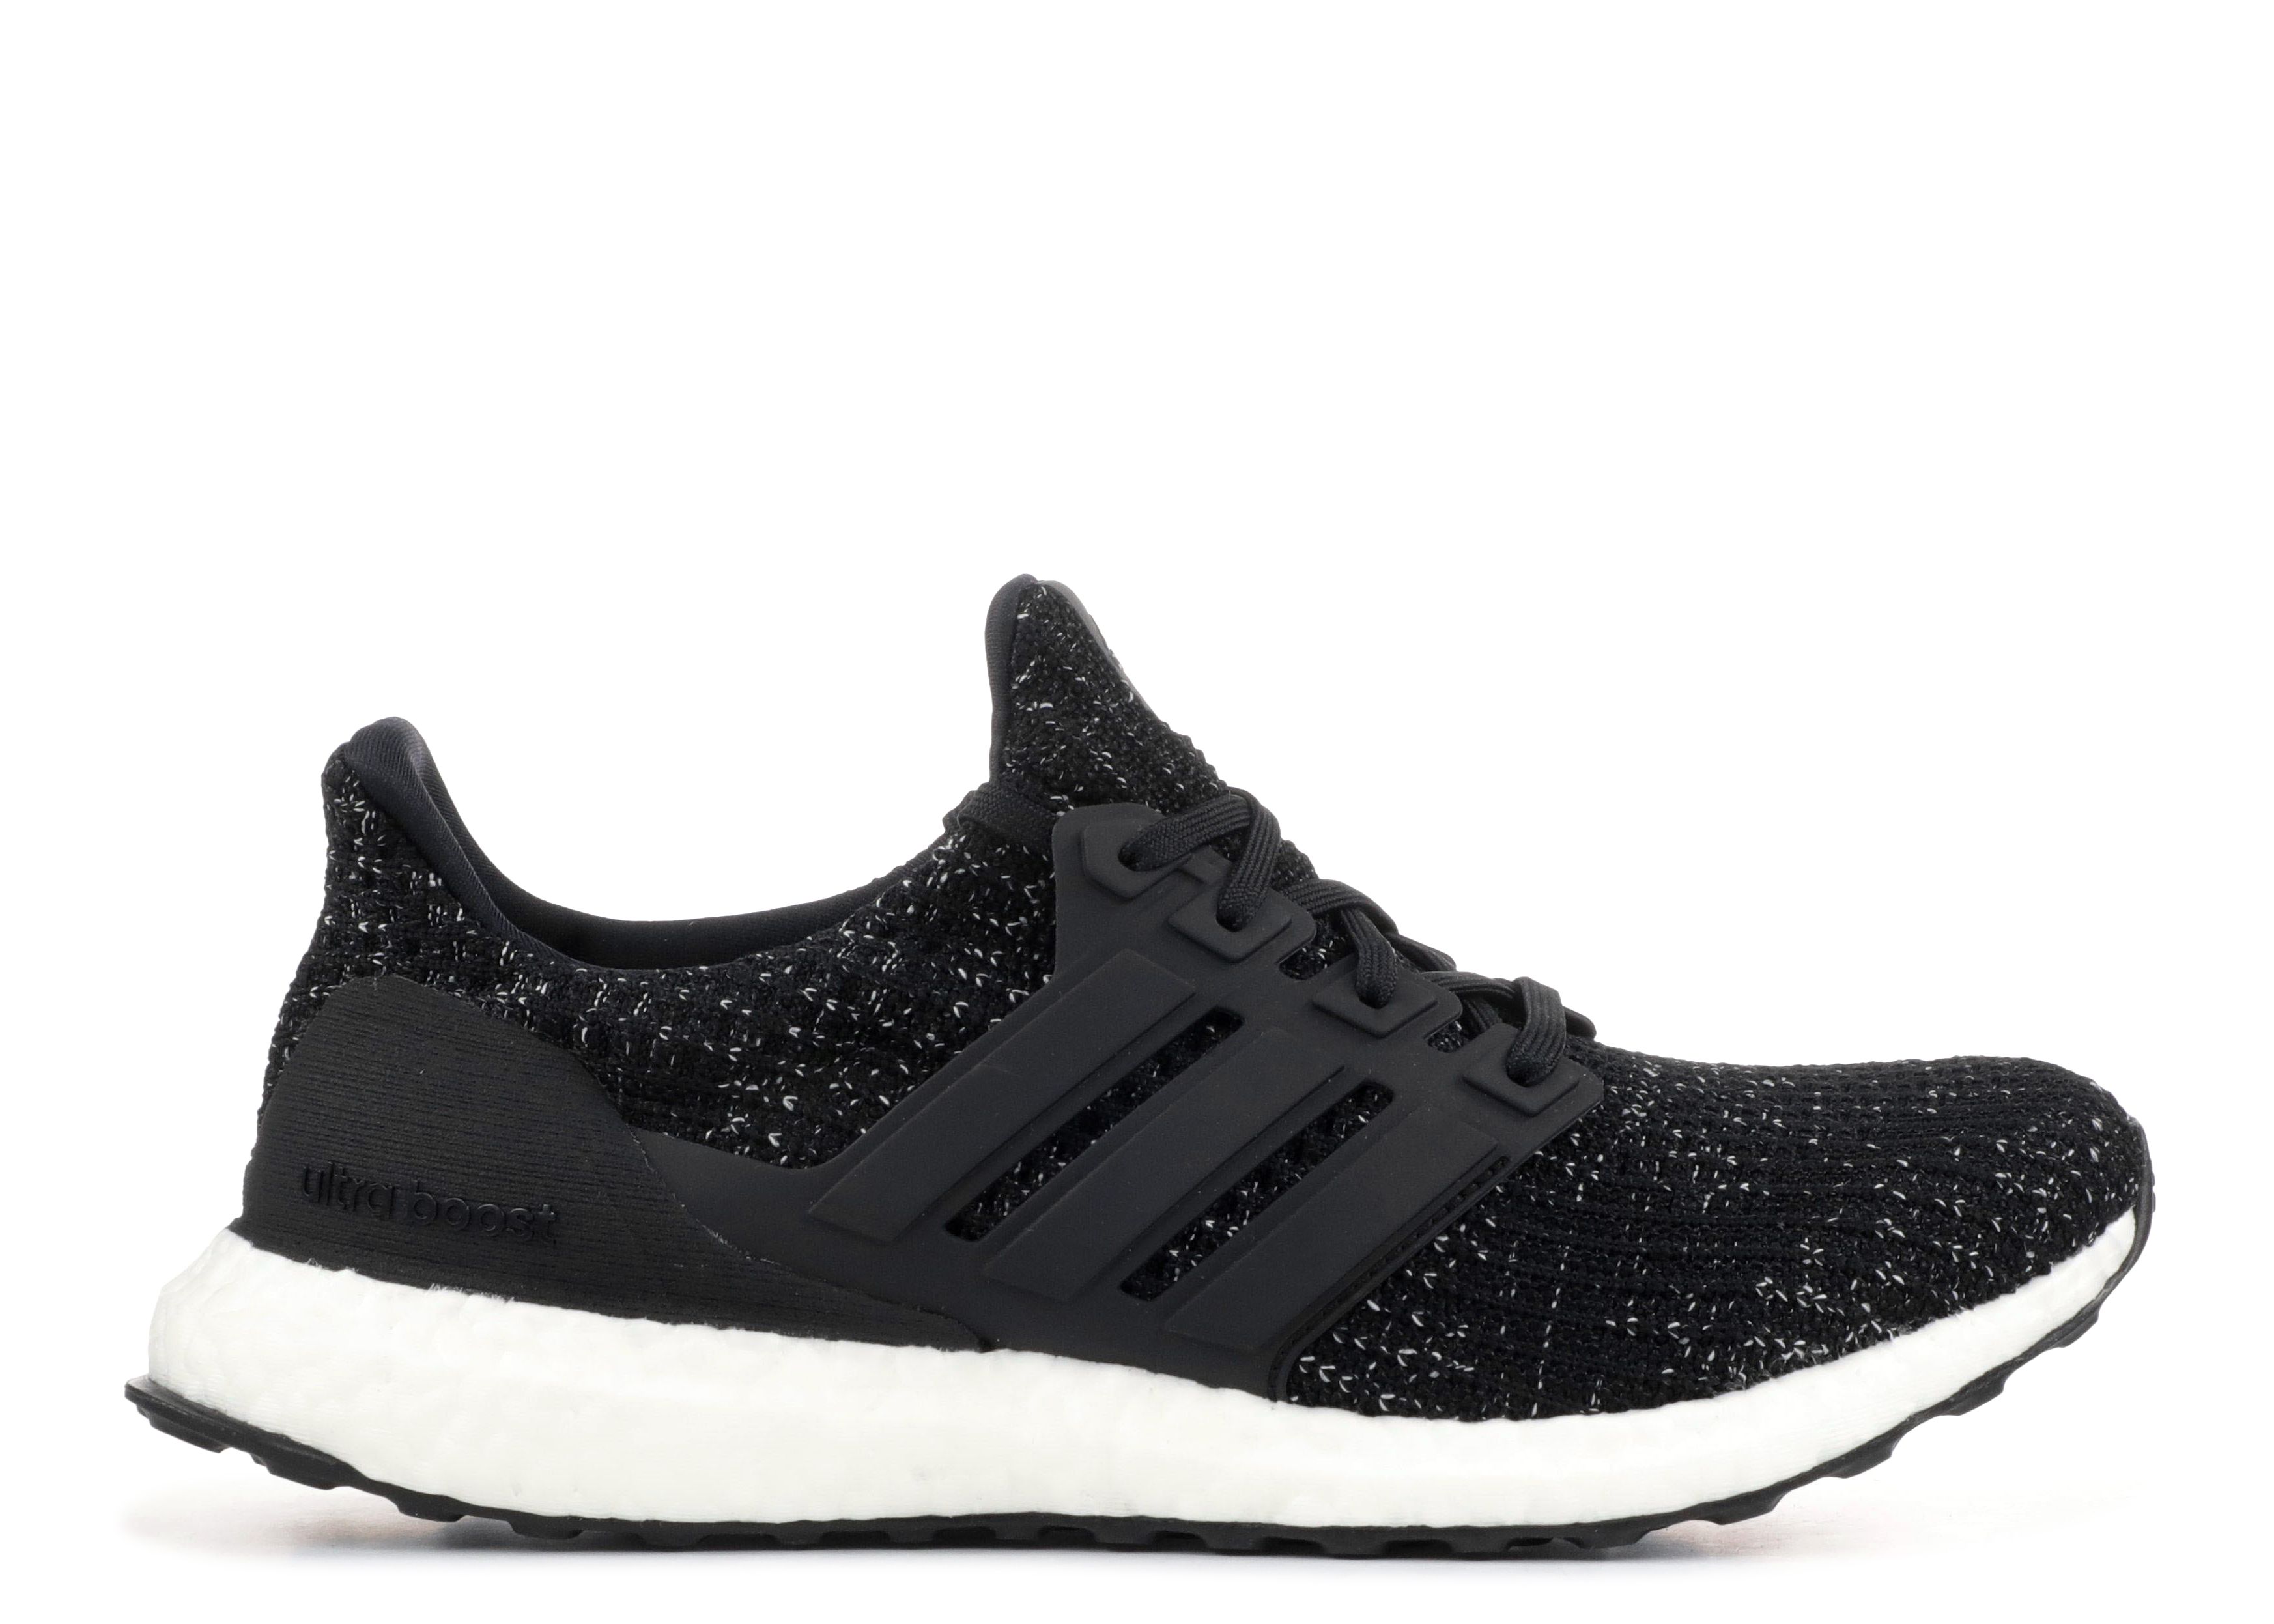 ultra boost black and white 4.0